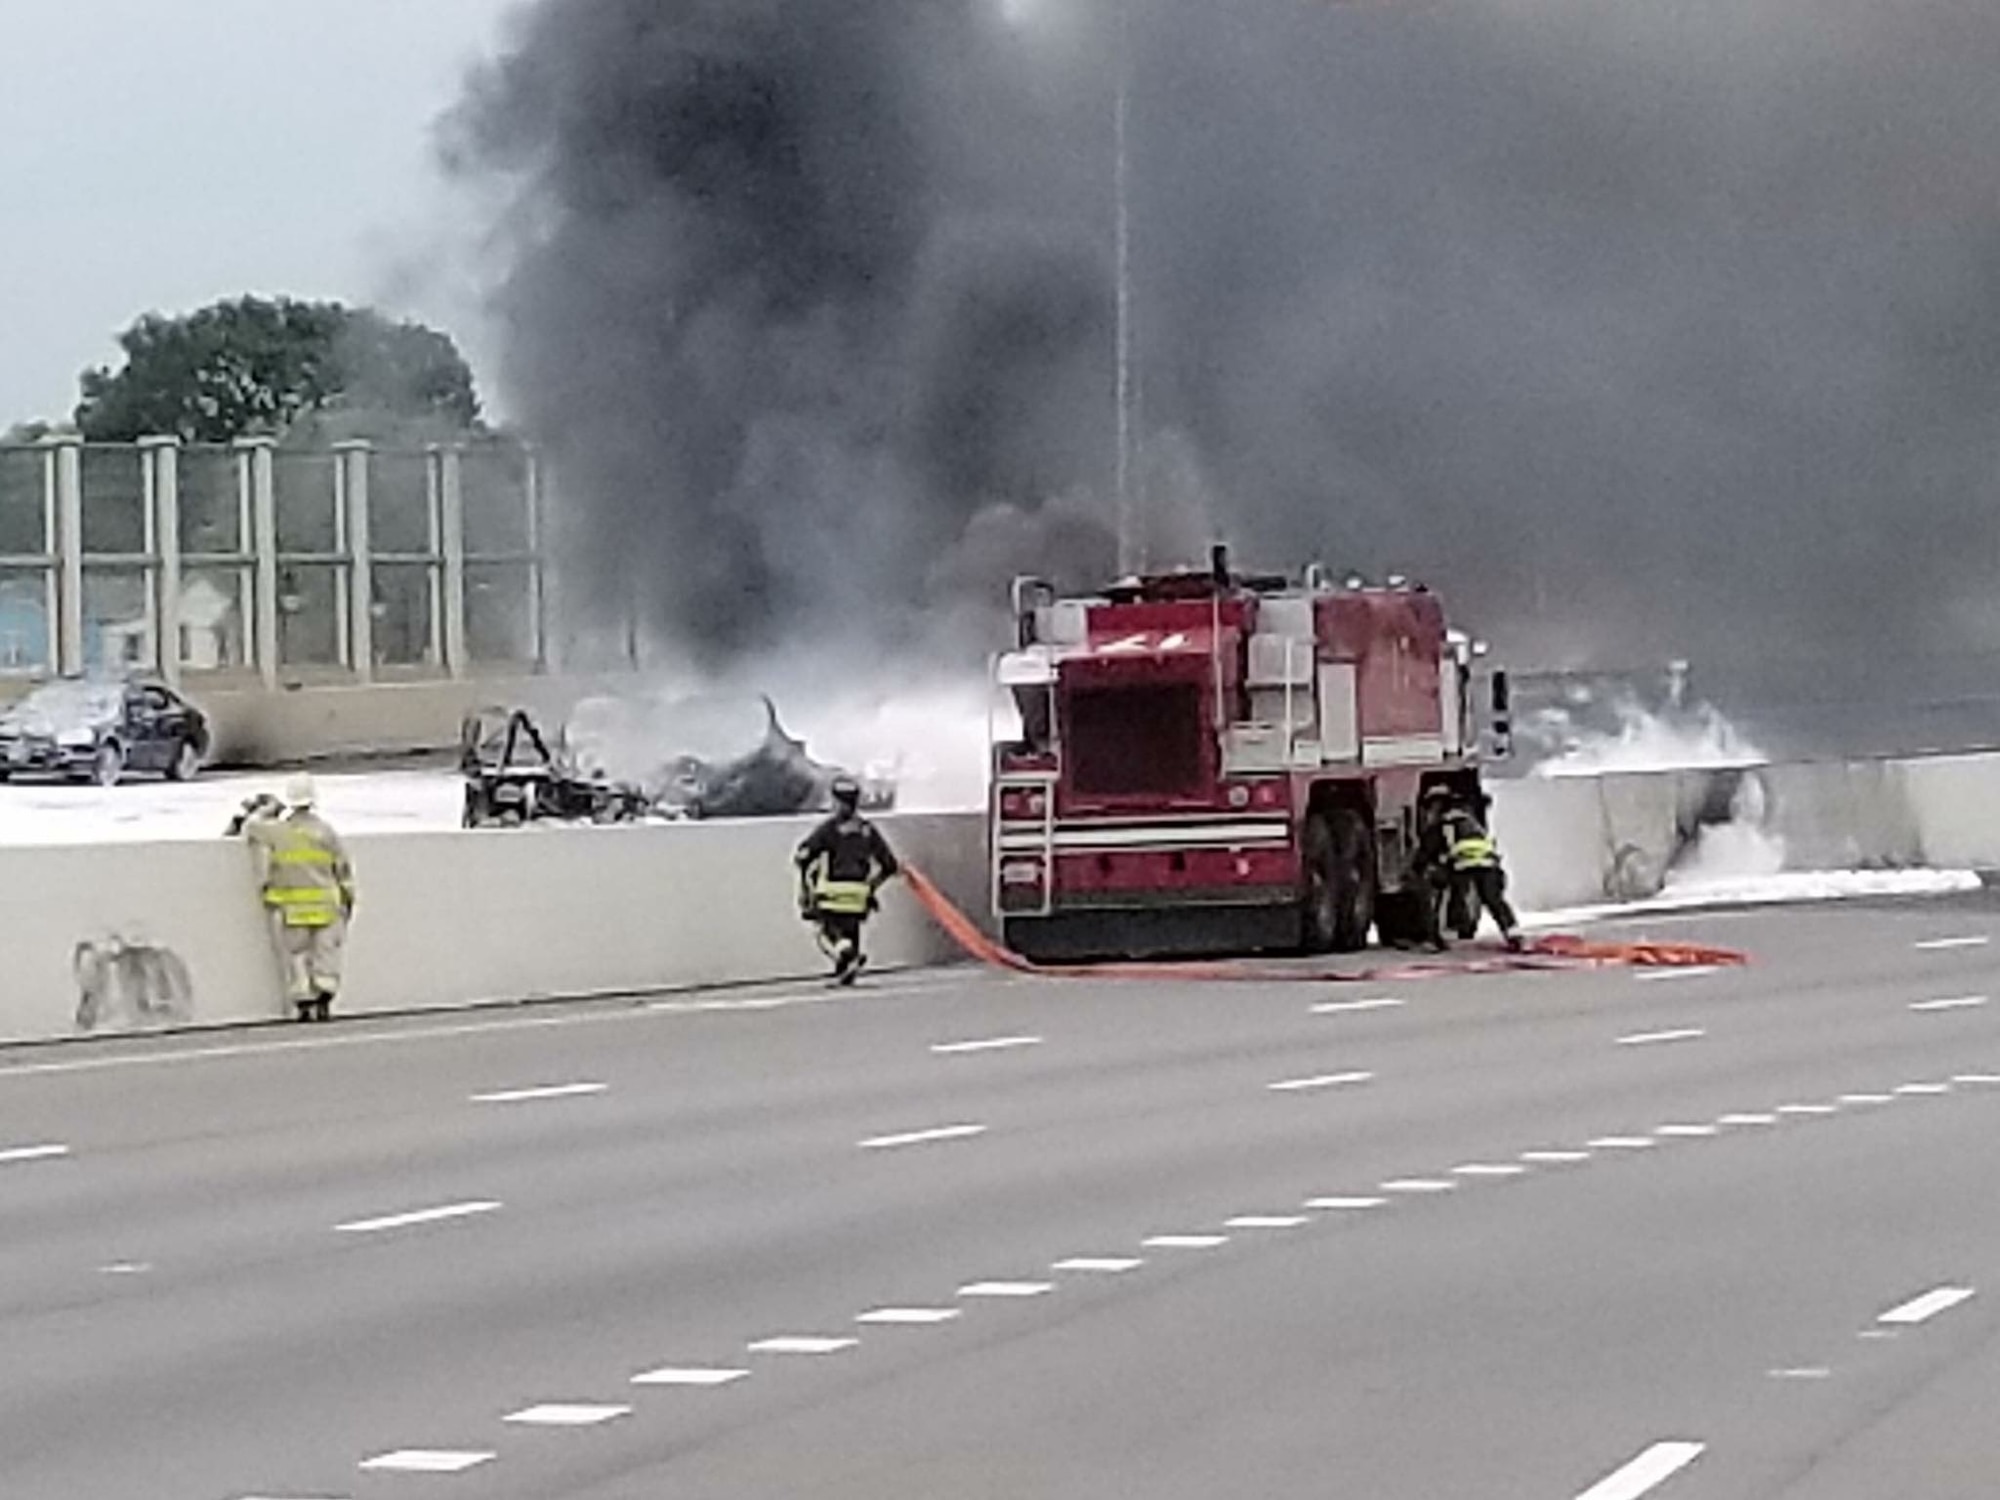 Wright-Patterson fire fighters assist Dayton first responders as they battle a major fuel fire on I-75 April 30, 2017 in Dayton, Ohio. After using foam to combat the fire from the ARFF crash vehicle, Wright-Patterson fire fighters passed hoses to Dayton fire fighters to extinguish the remaining fire. (U.S. Air Force photo/Keith Hawkins)  